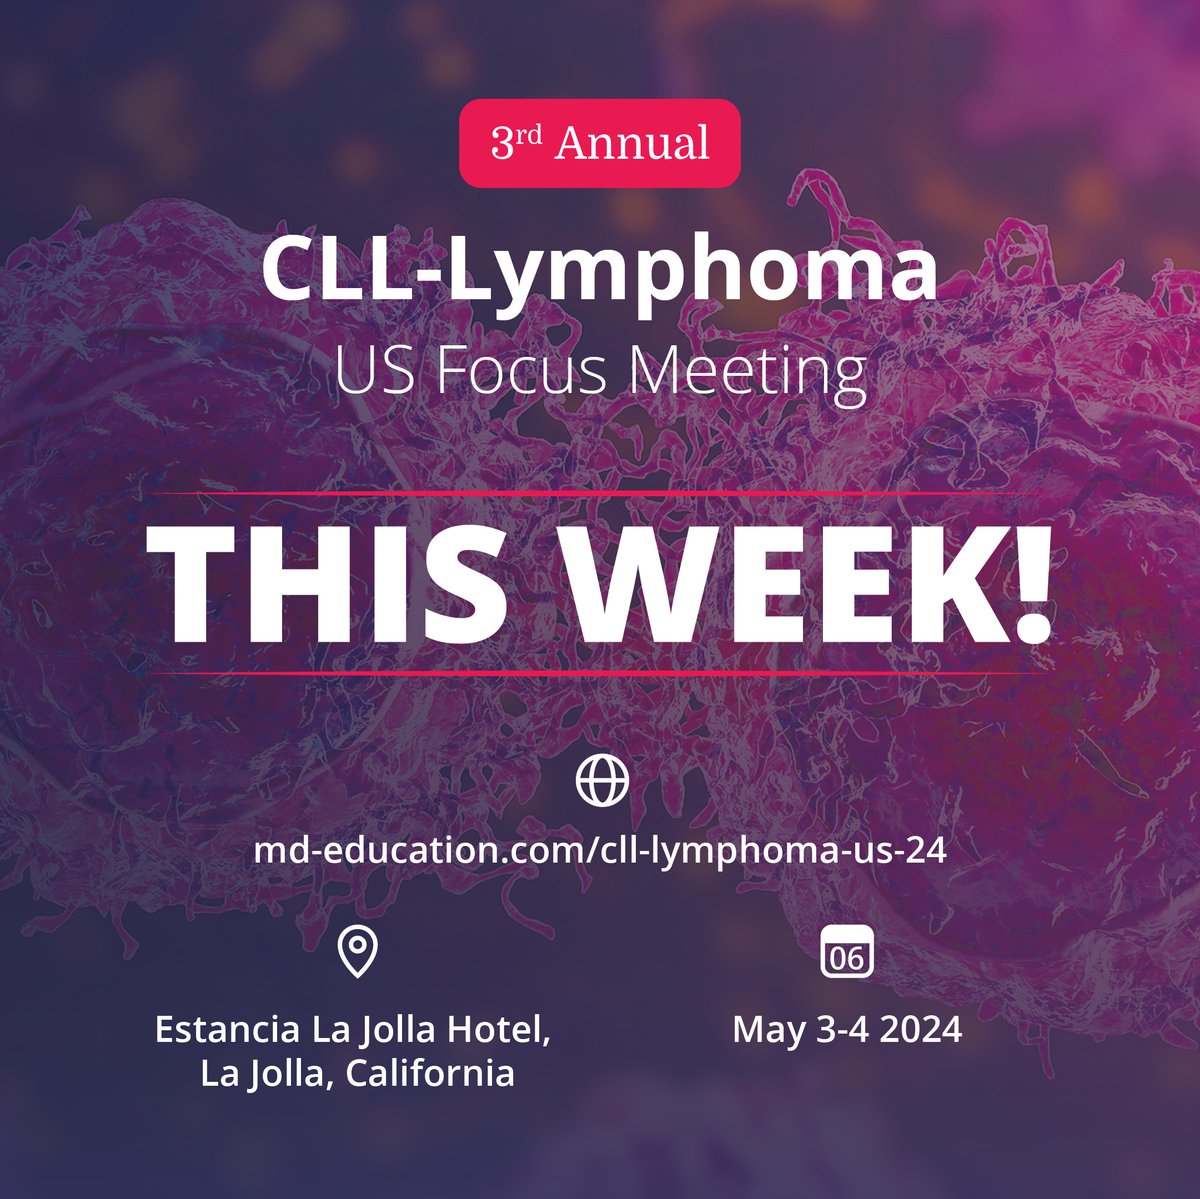 ⭐ The CLL-Lymphoma US Focus Meeting is taking place this Friday! ⭐ We are excited that the 3rd annual event is now only days away! It promises to be a great few days of discussions and presentations, so take a look at the event page below, and keep an eye out in the week as we